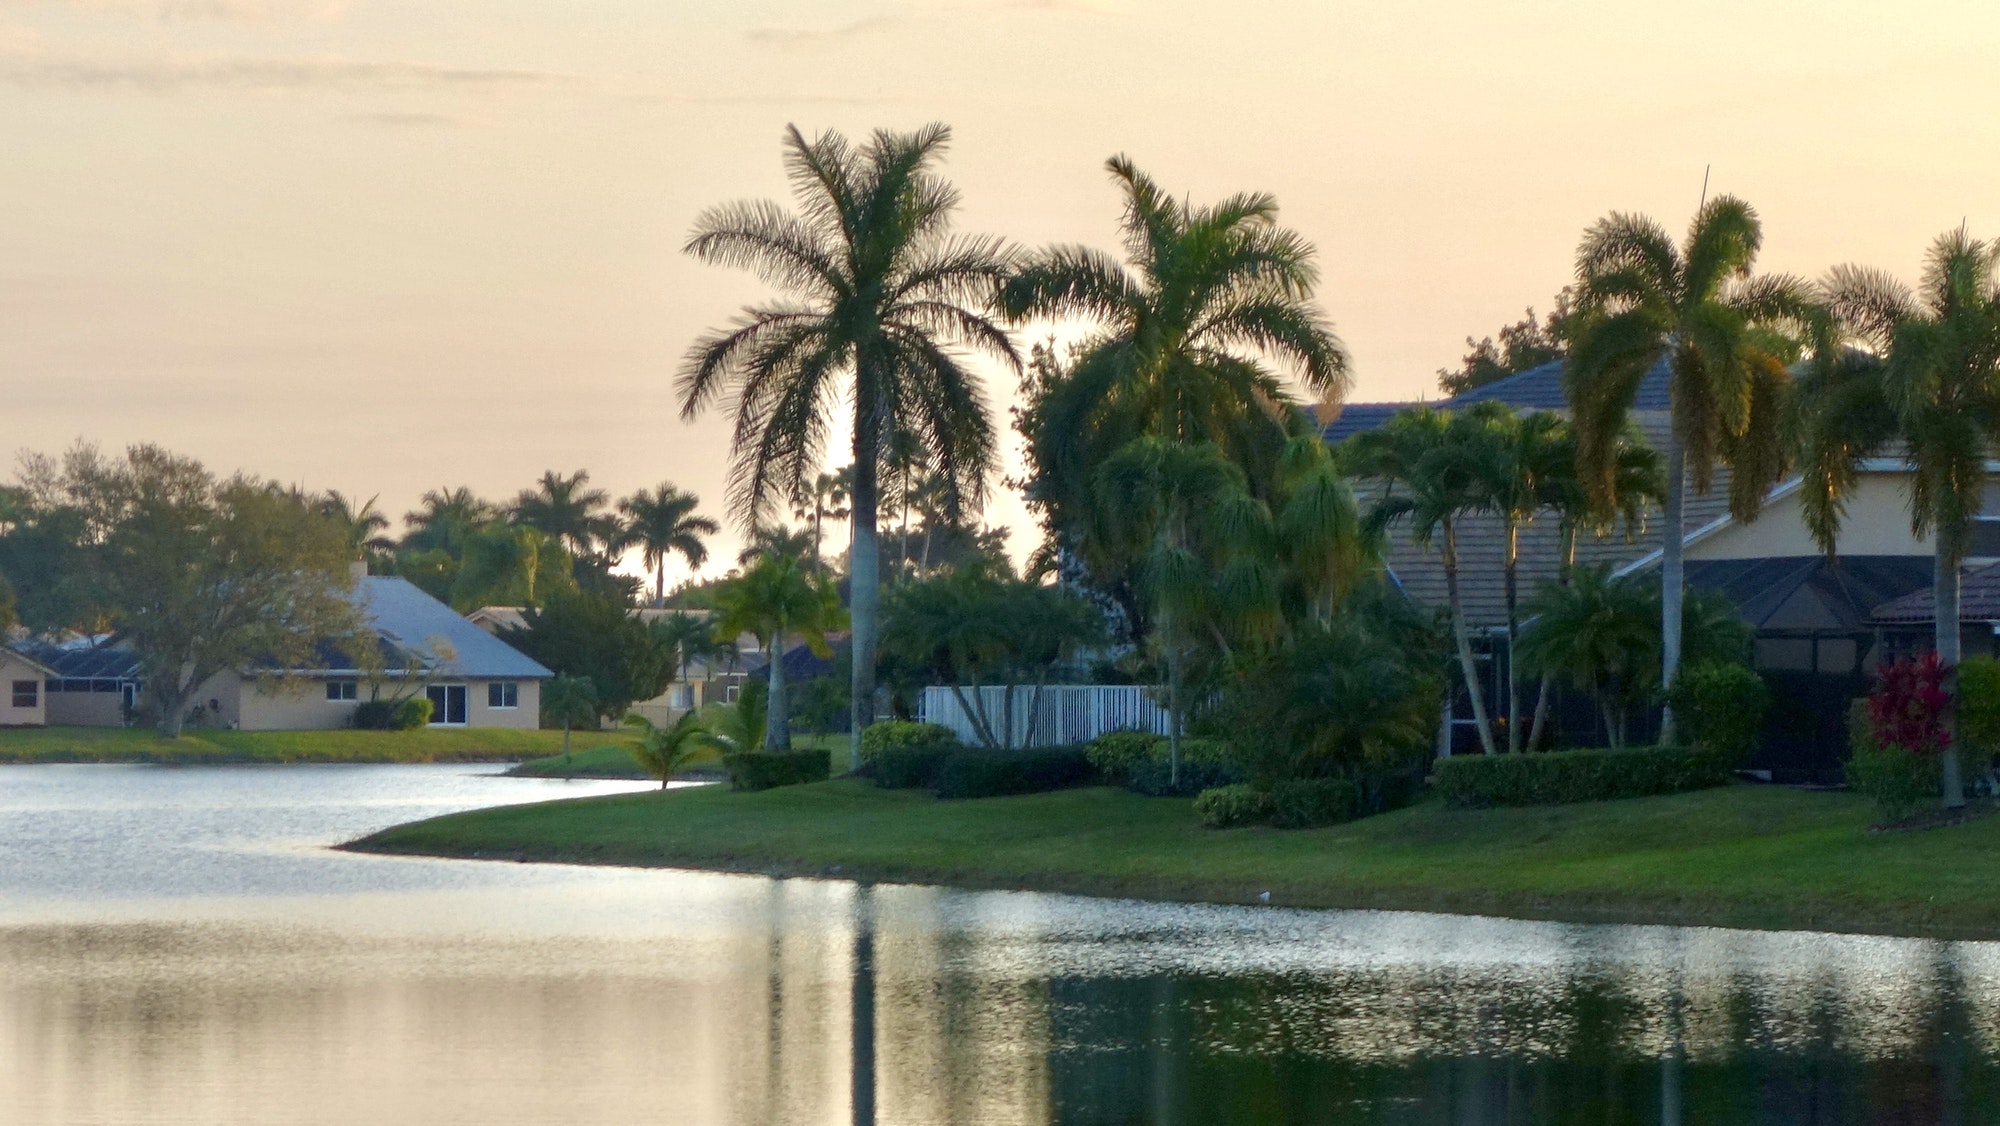 Waterfront Homes In A Florida Neighborhood